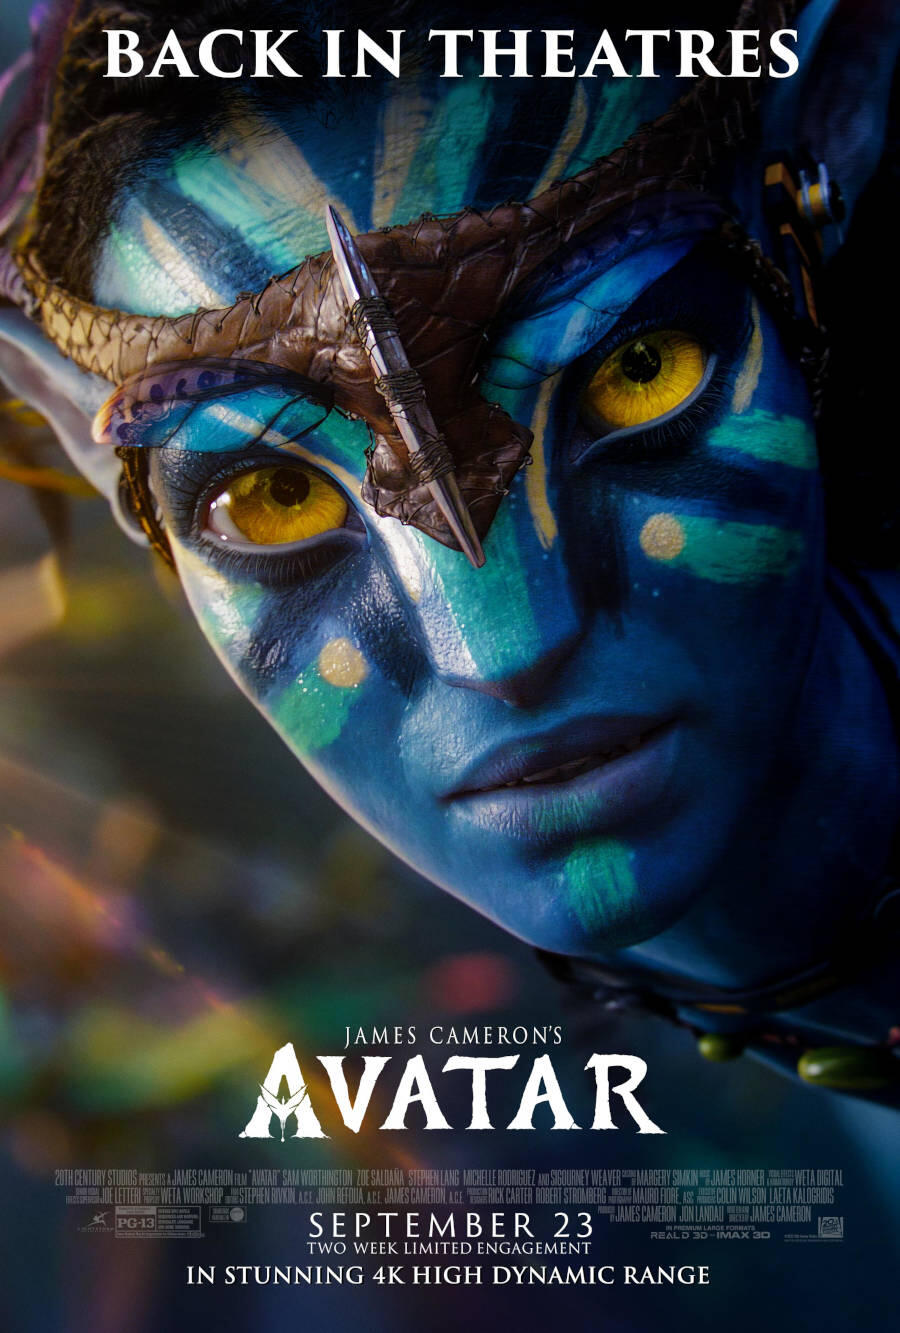 Avatar rerelease eyes USD 712 million opening at box office  English  Movie News  Times of India